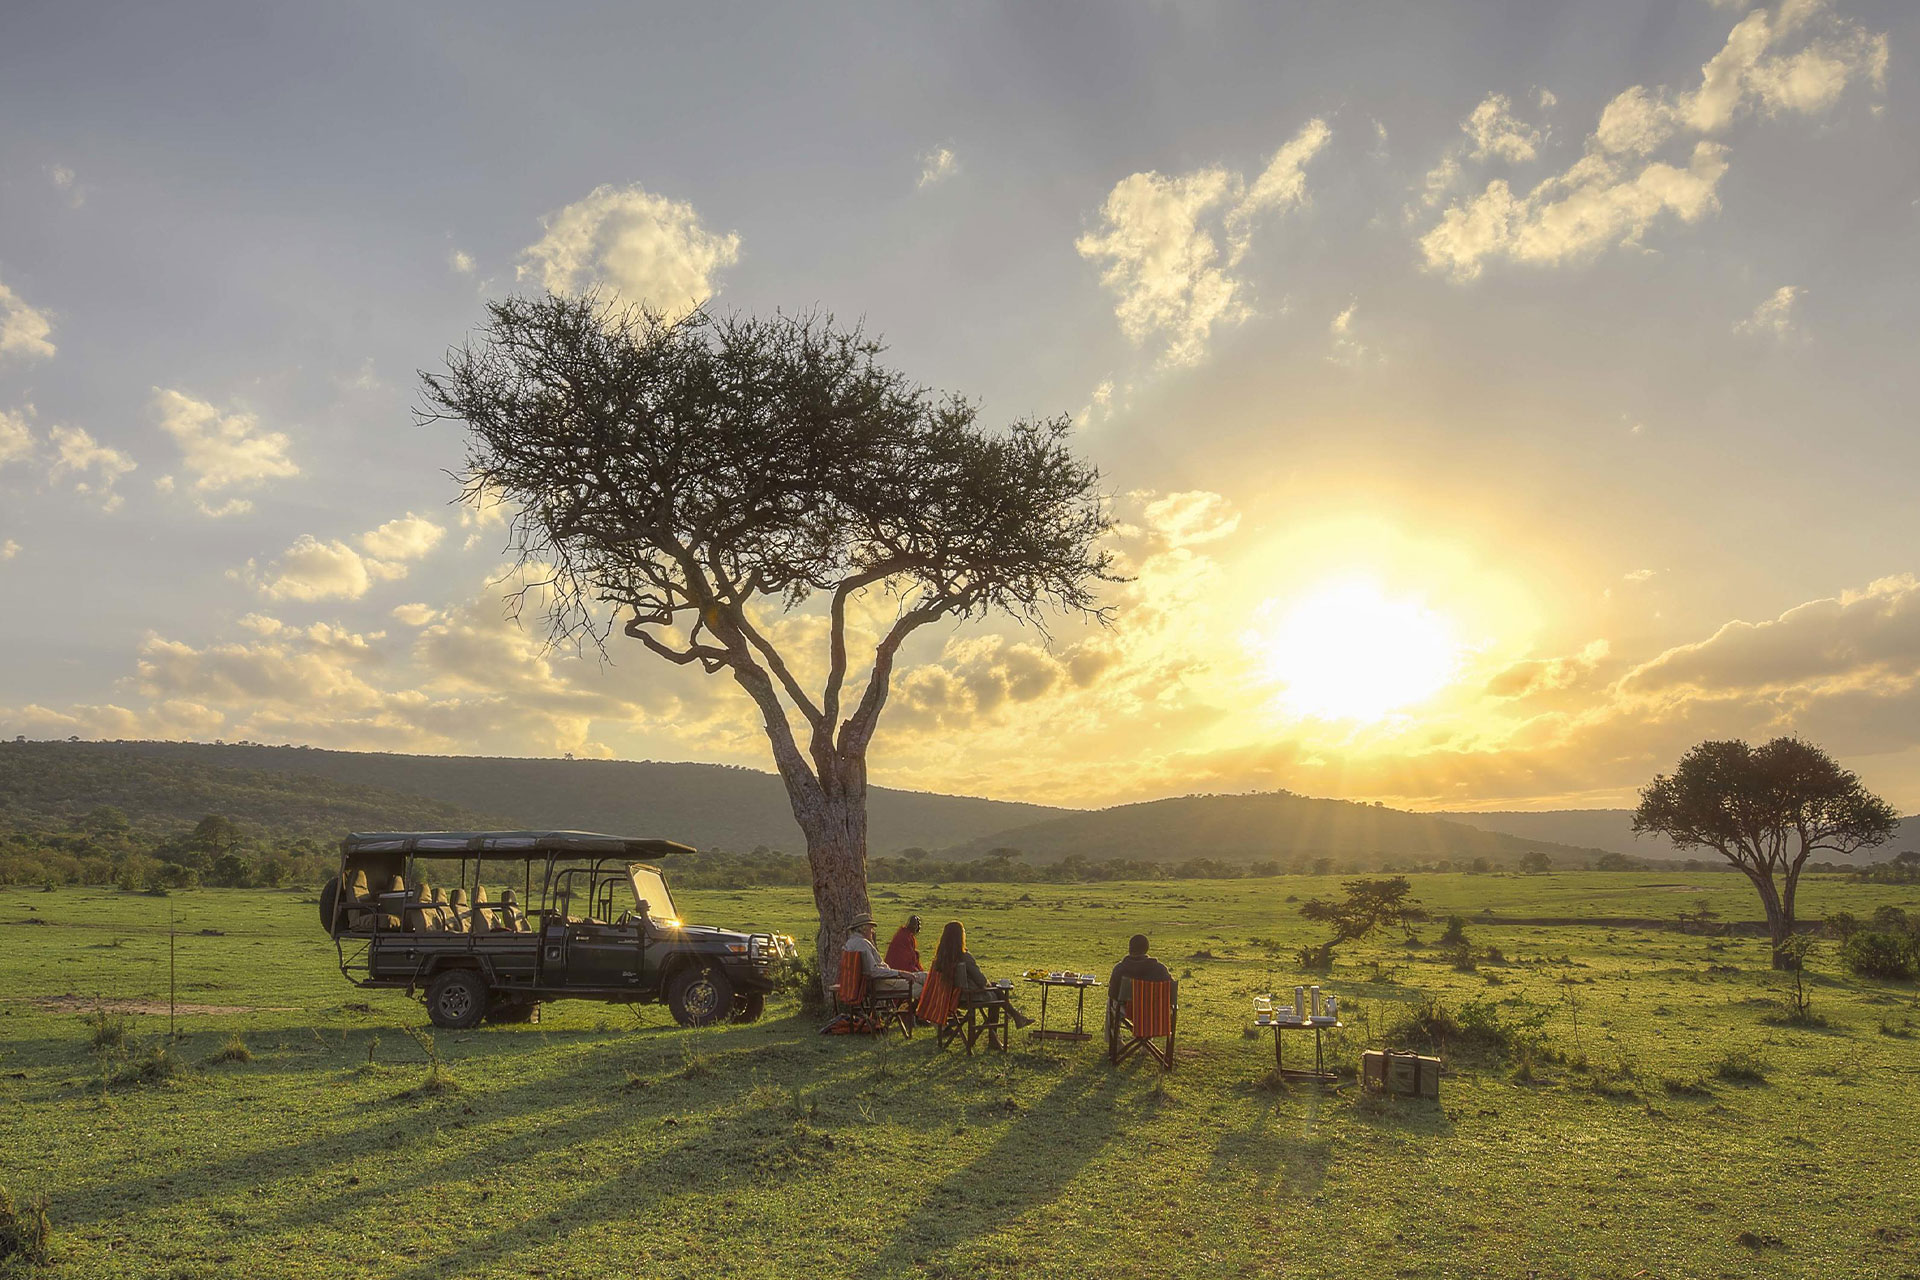 People sitting next to a car watching the sunset in the African bush